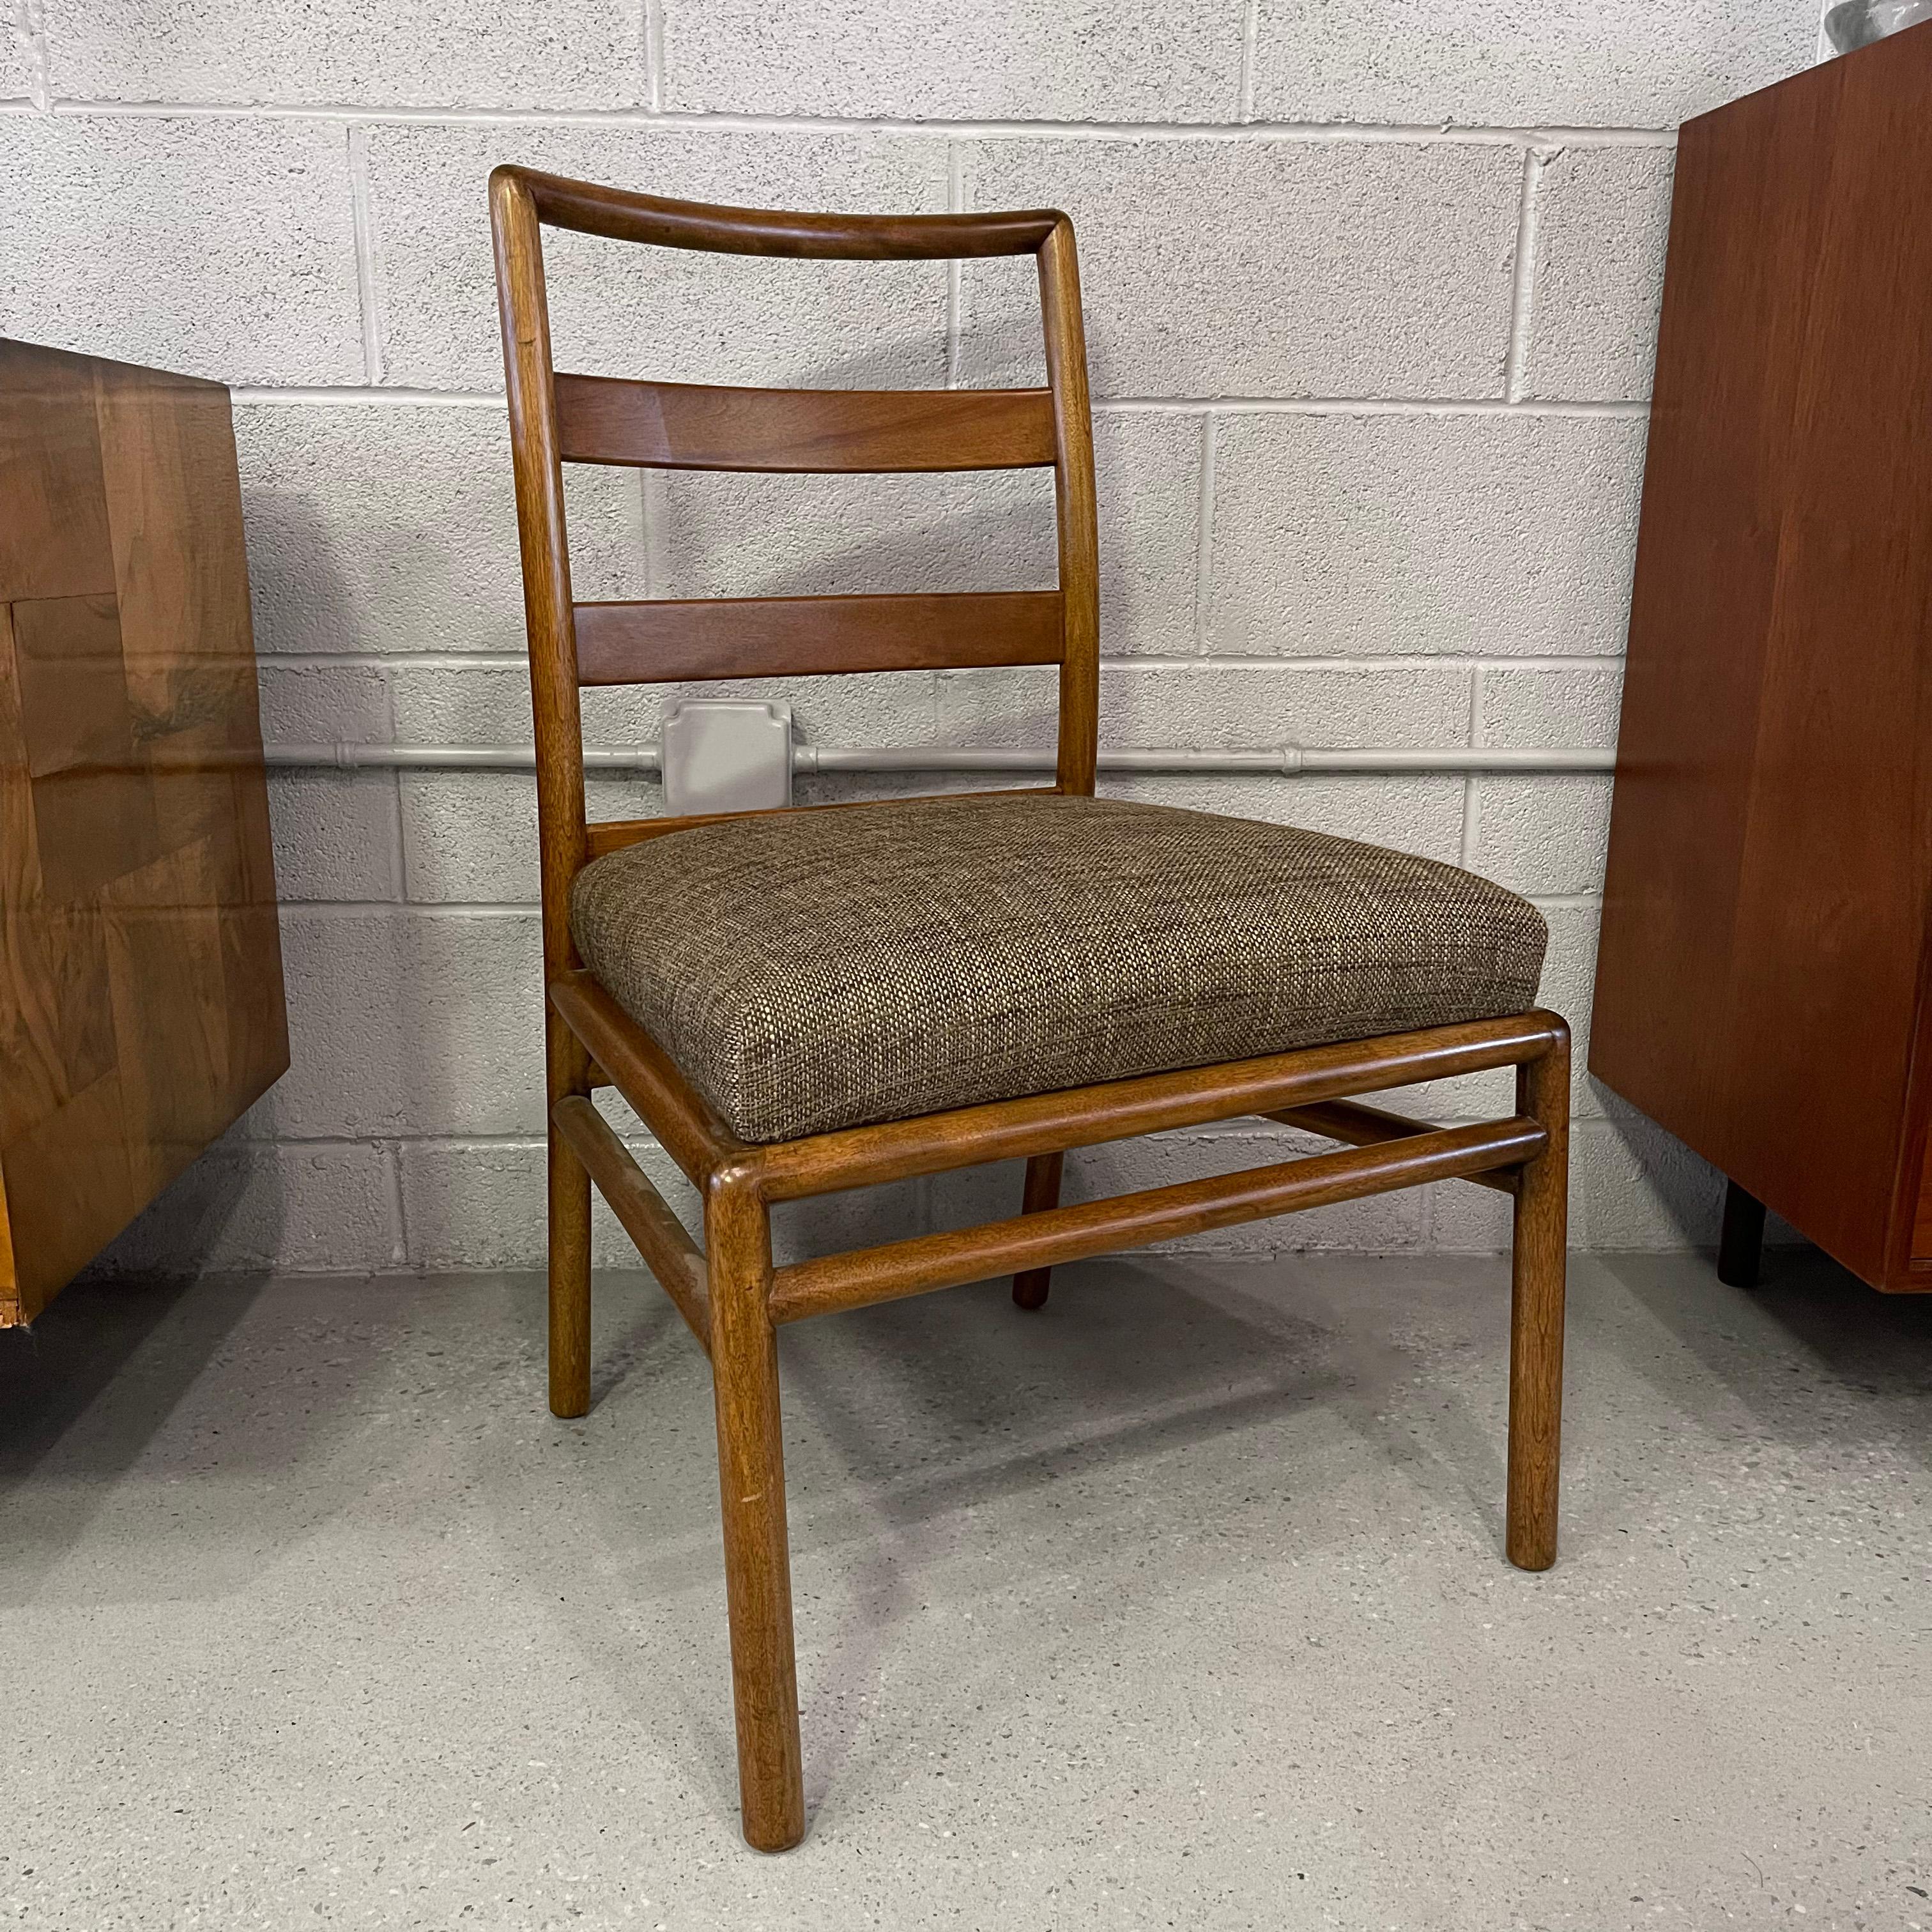 Mid-Century Modern, side chair by T.H. Robsjohn Gibbings for Widdicomb features a walnut, ladder back frame with upholstered seat in mocha tweed. A great mid century modern chair for dining, desk or accent.
 